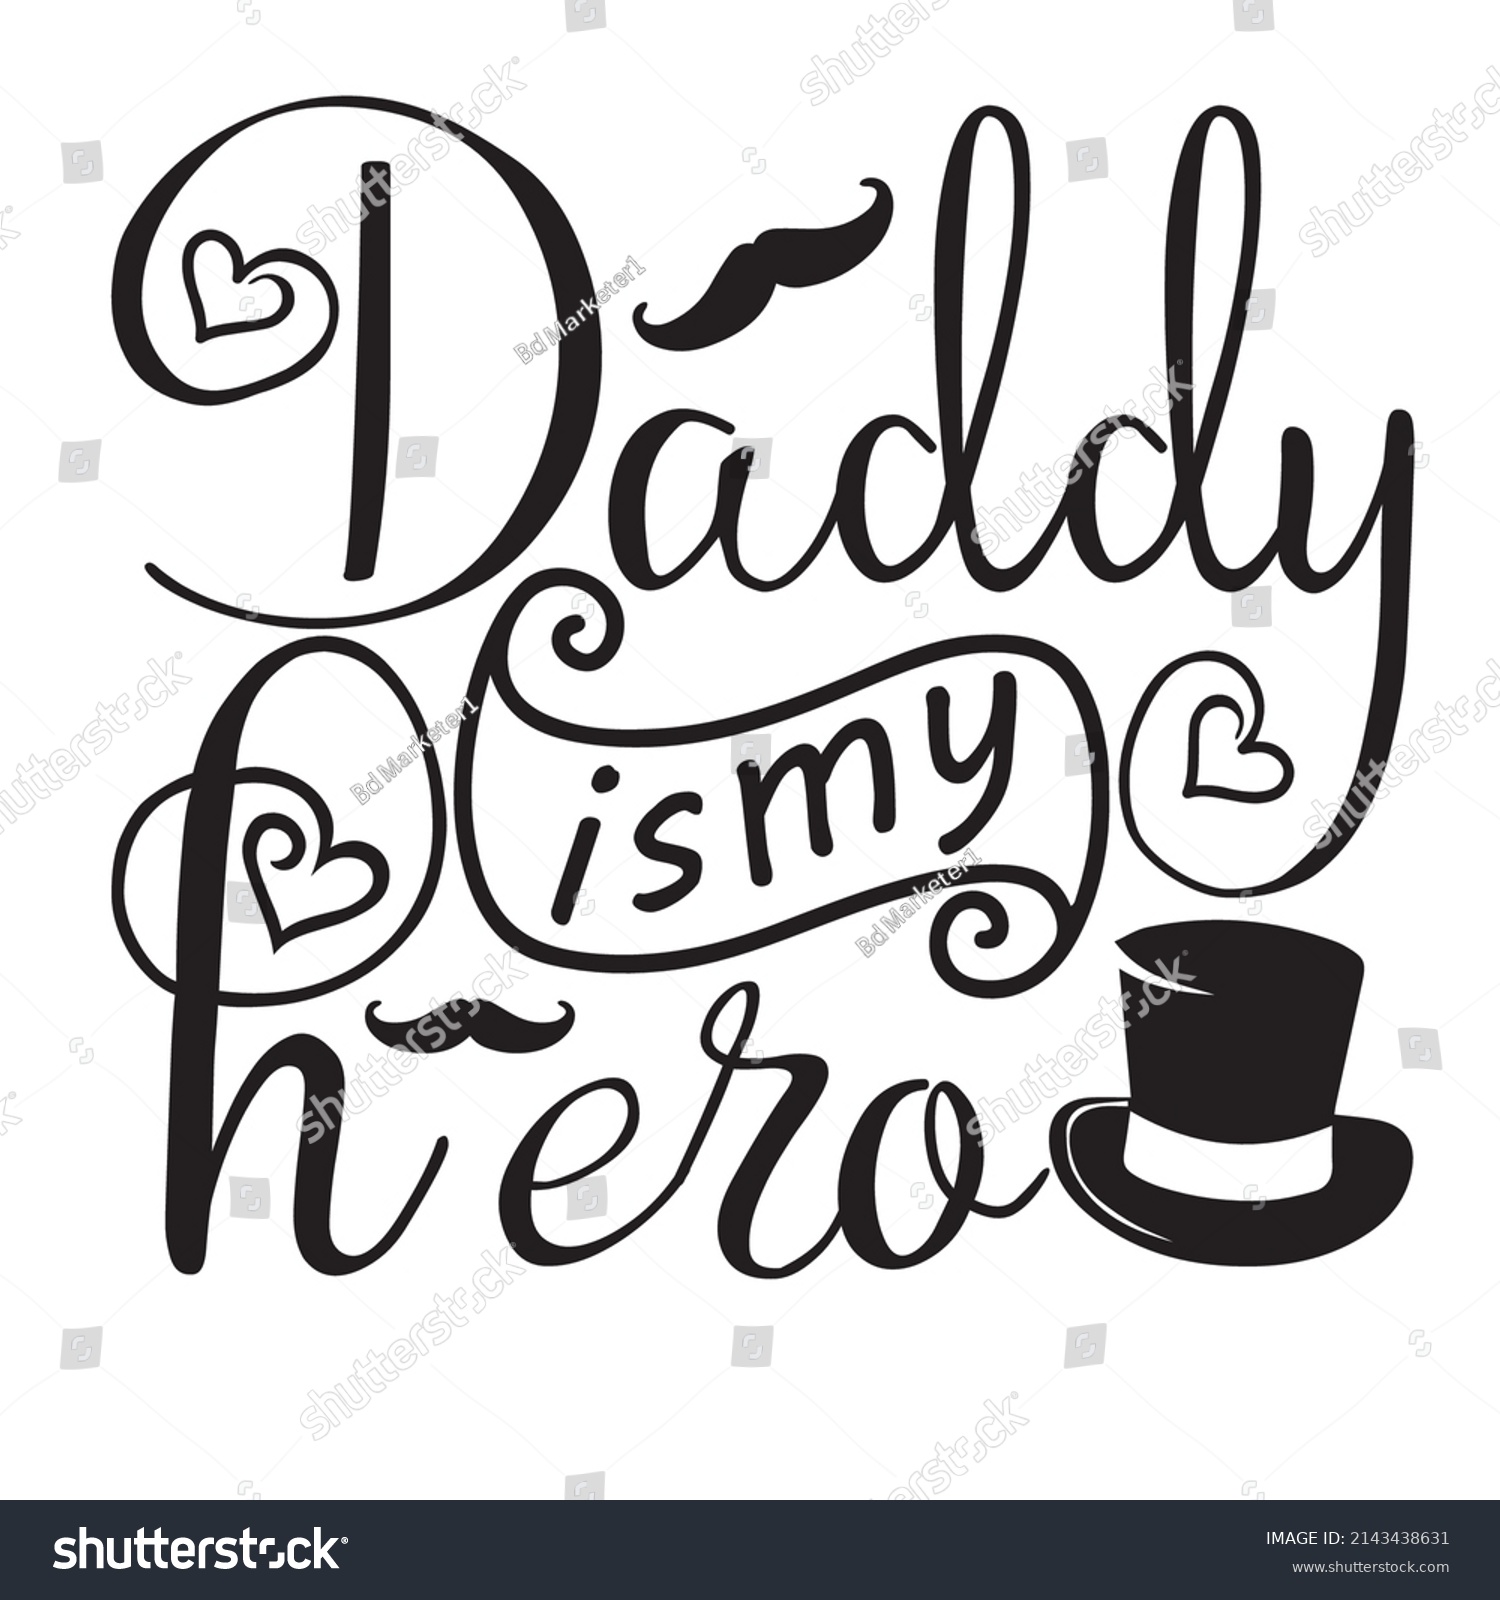 SVG of Happy Fathers Day lettering calligraphic compositions. Hand drawn inscriptions on dark background for greeting card.Daddy is my hero,svg,t-shirt design. You are the most awesome dad. svg